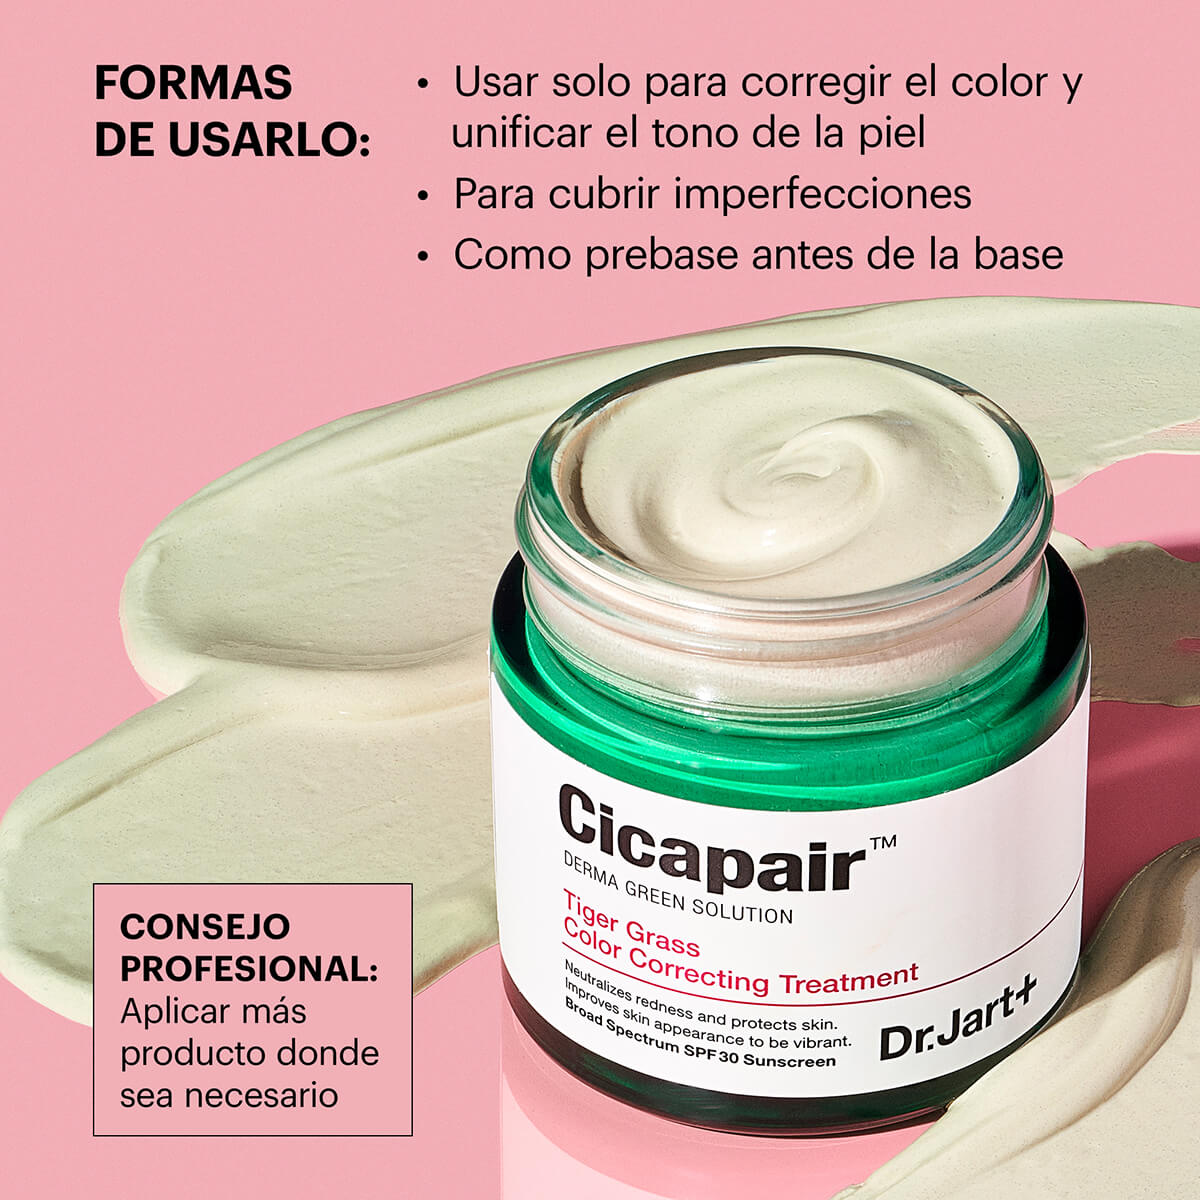 CICAPAIR™ TIGER GRASS COLOR CORRECTING TREATMENT SPF 30